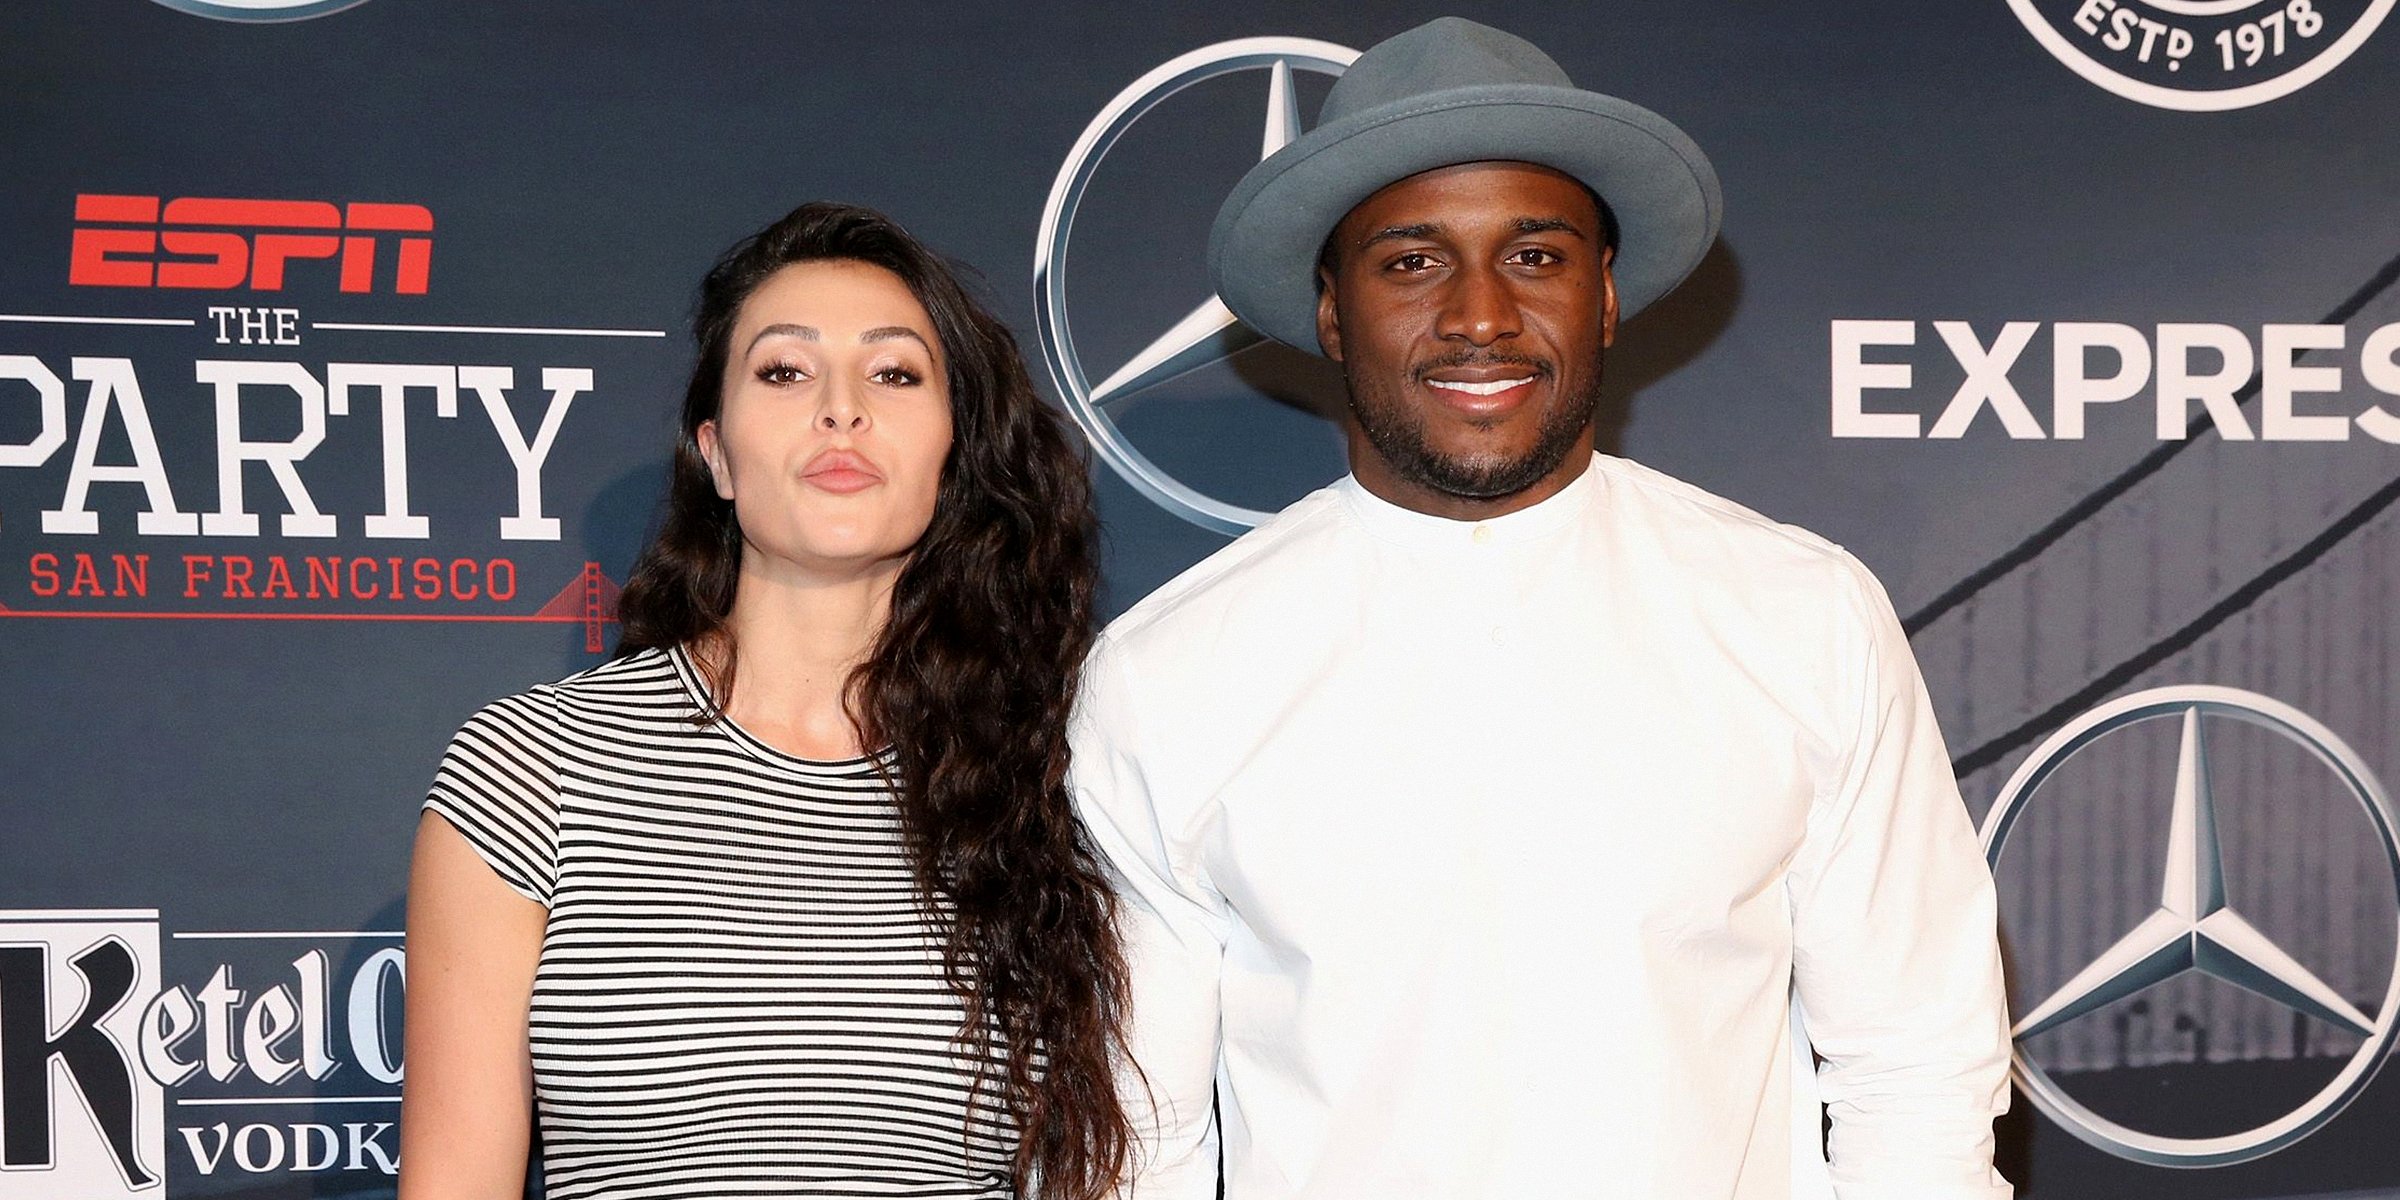 Lilit Avagyan and Reggie Bush | Source: Getty Images